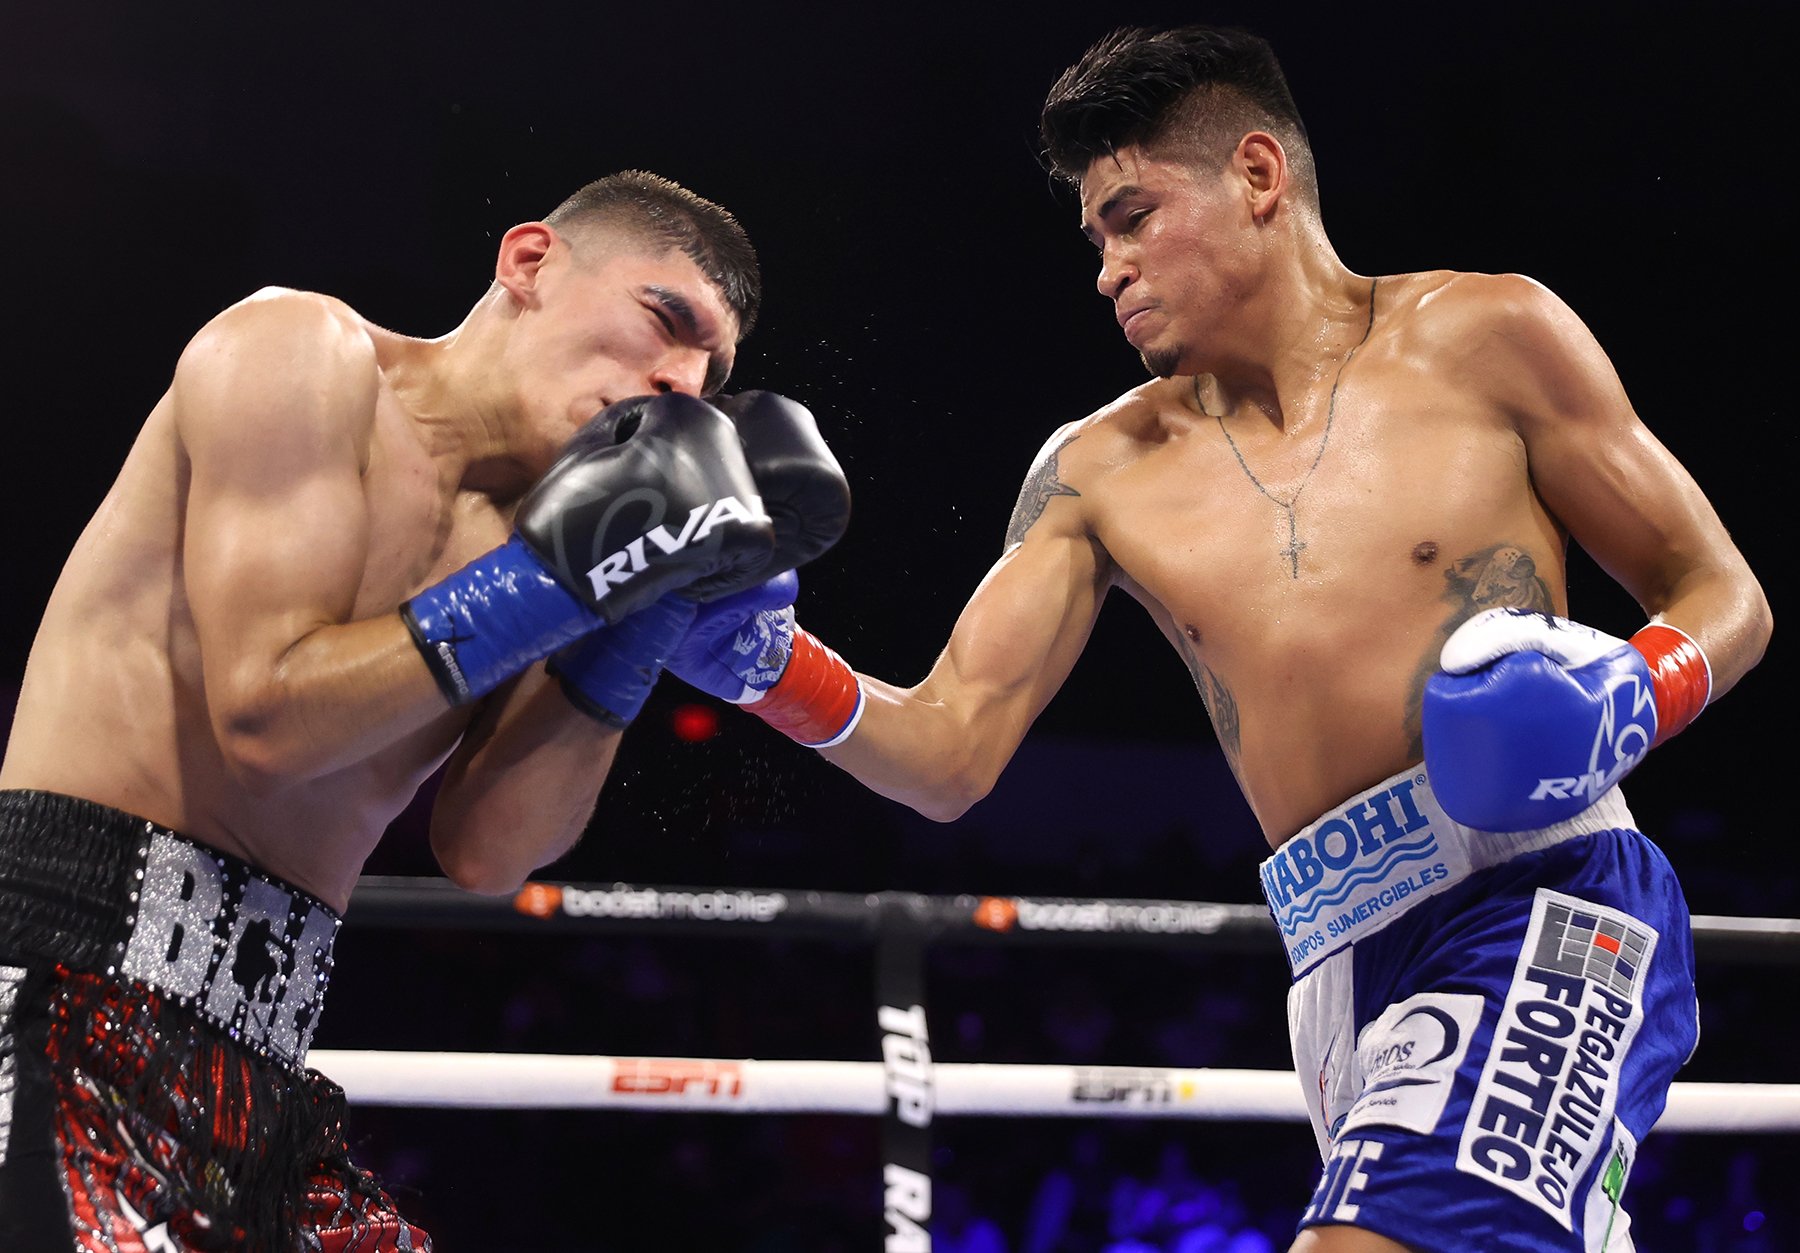  Emanuel Navarrete vying to become three-division titlist against Liam Wilson 